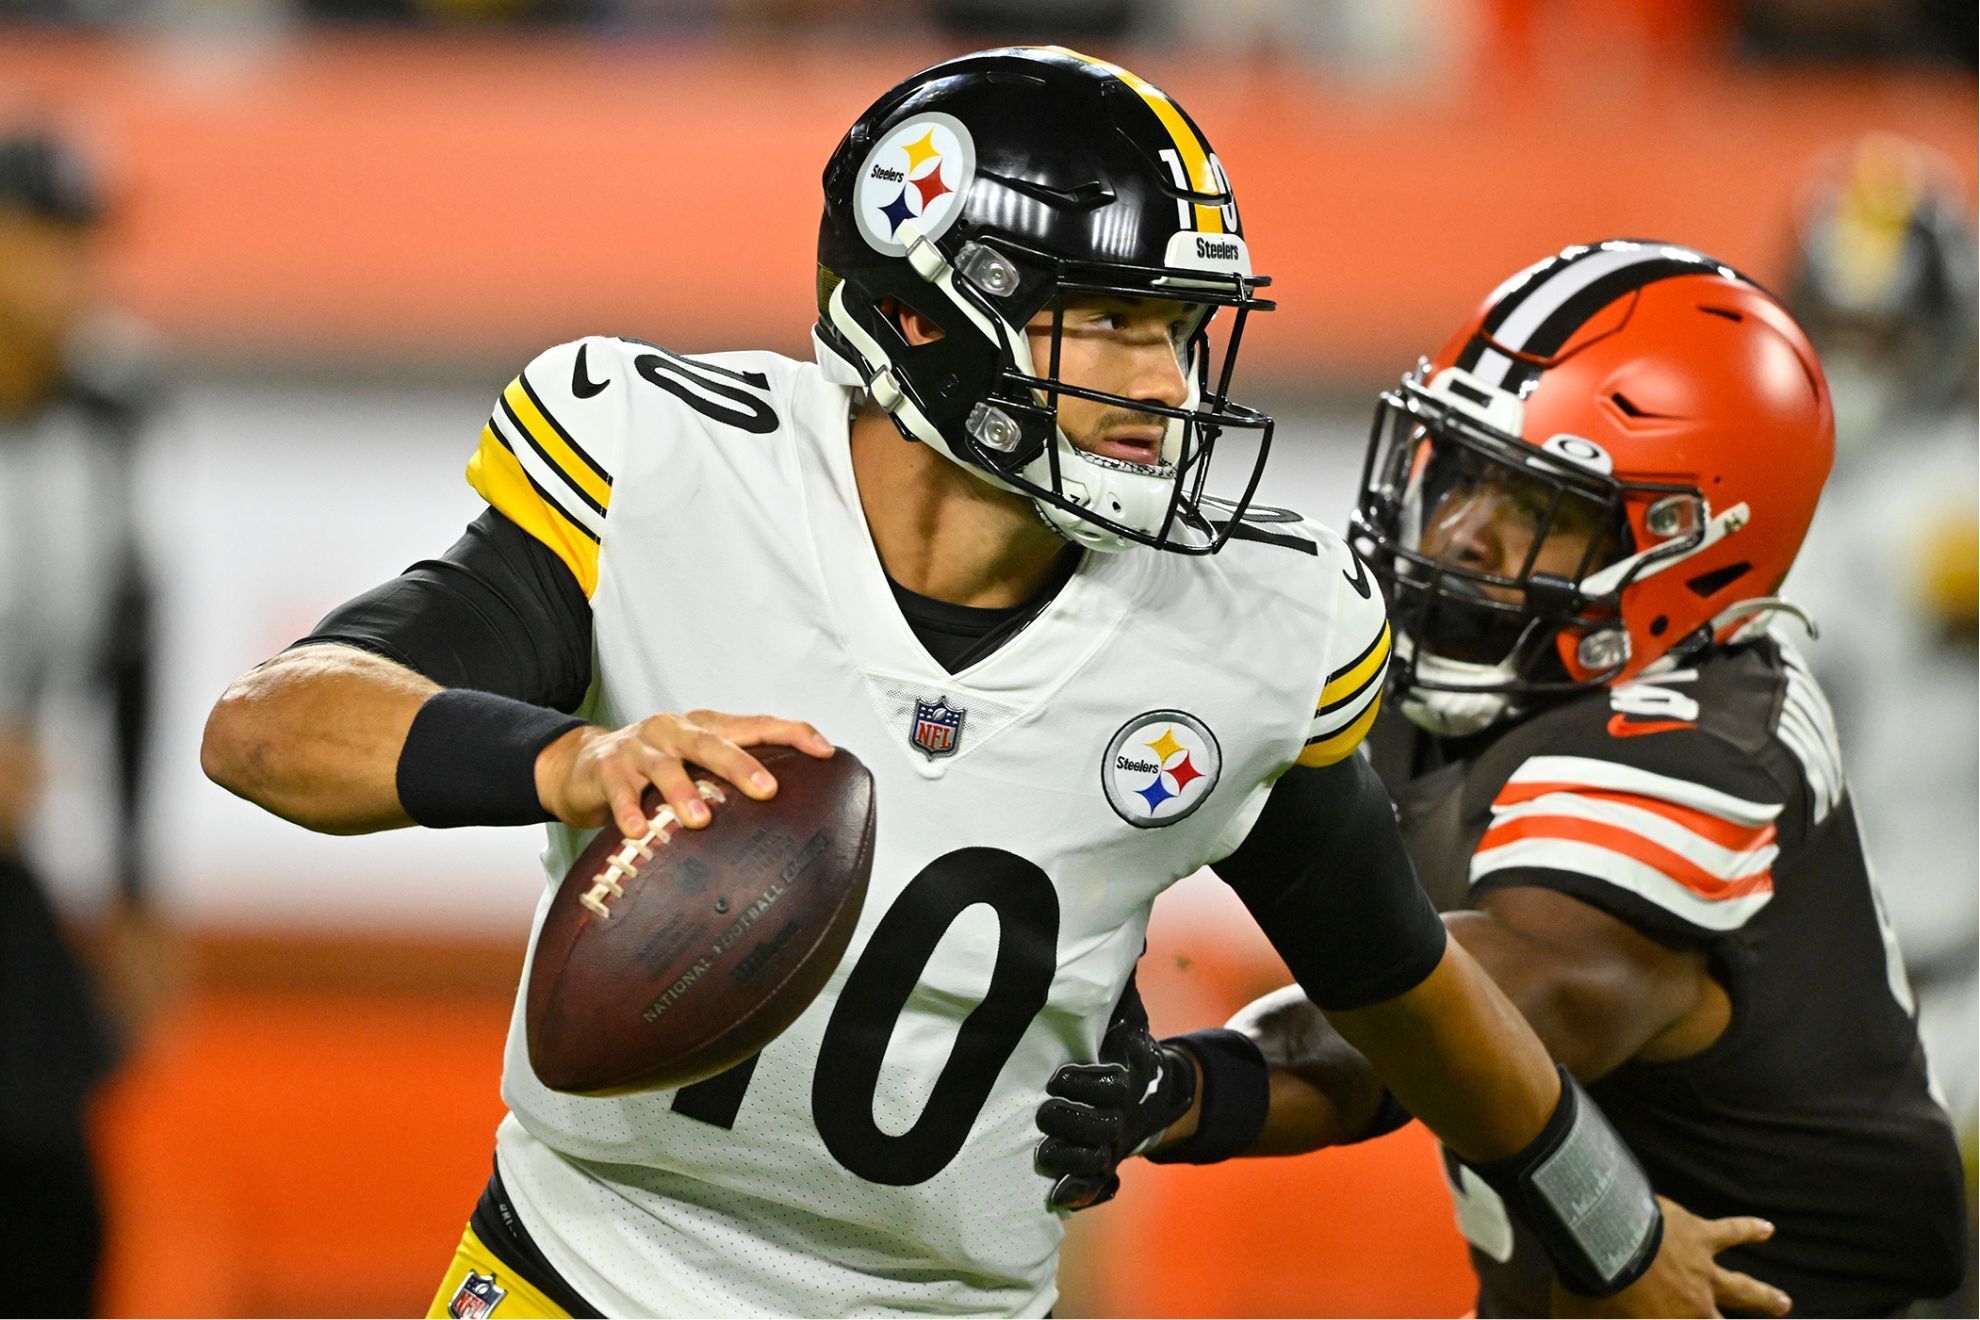 Steelers 17-29 Browns: Final score and highlights